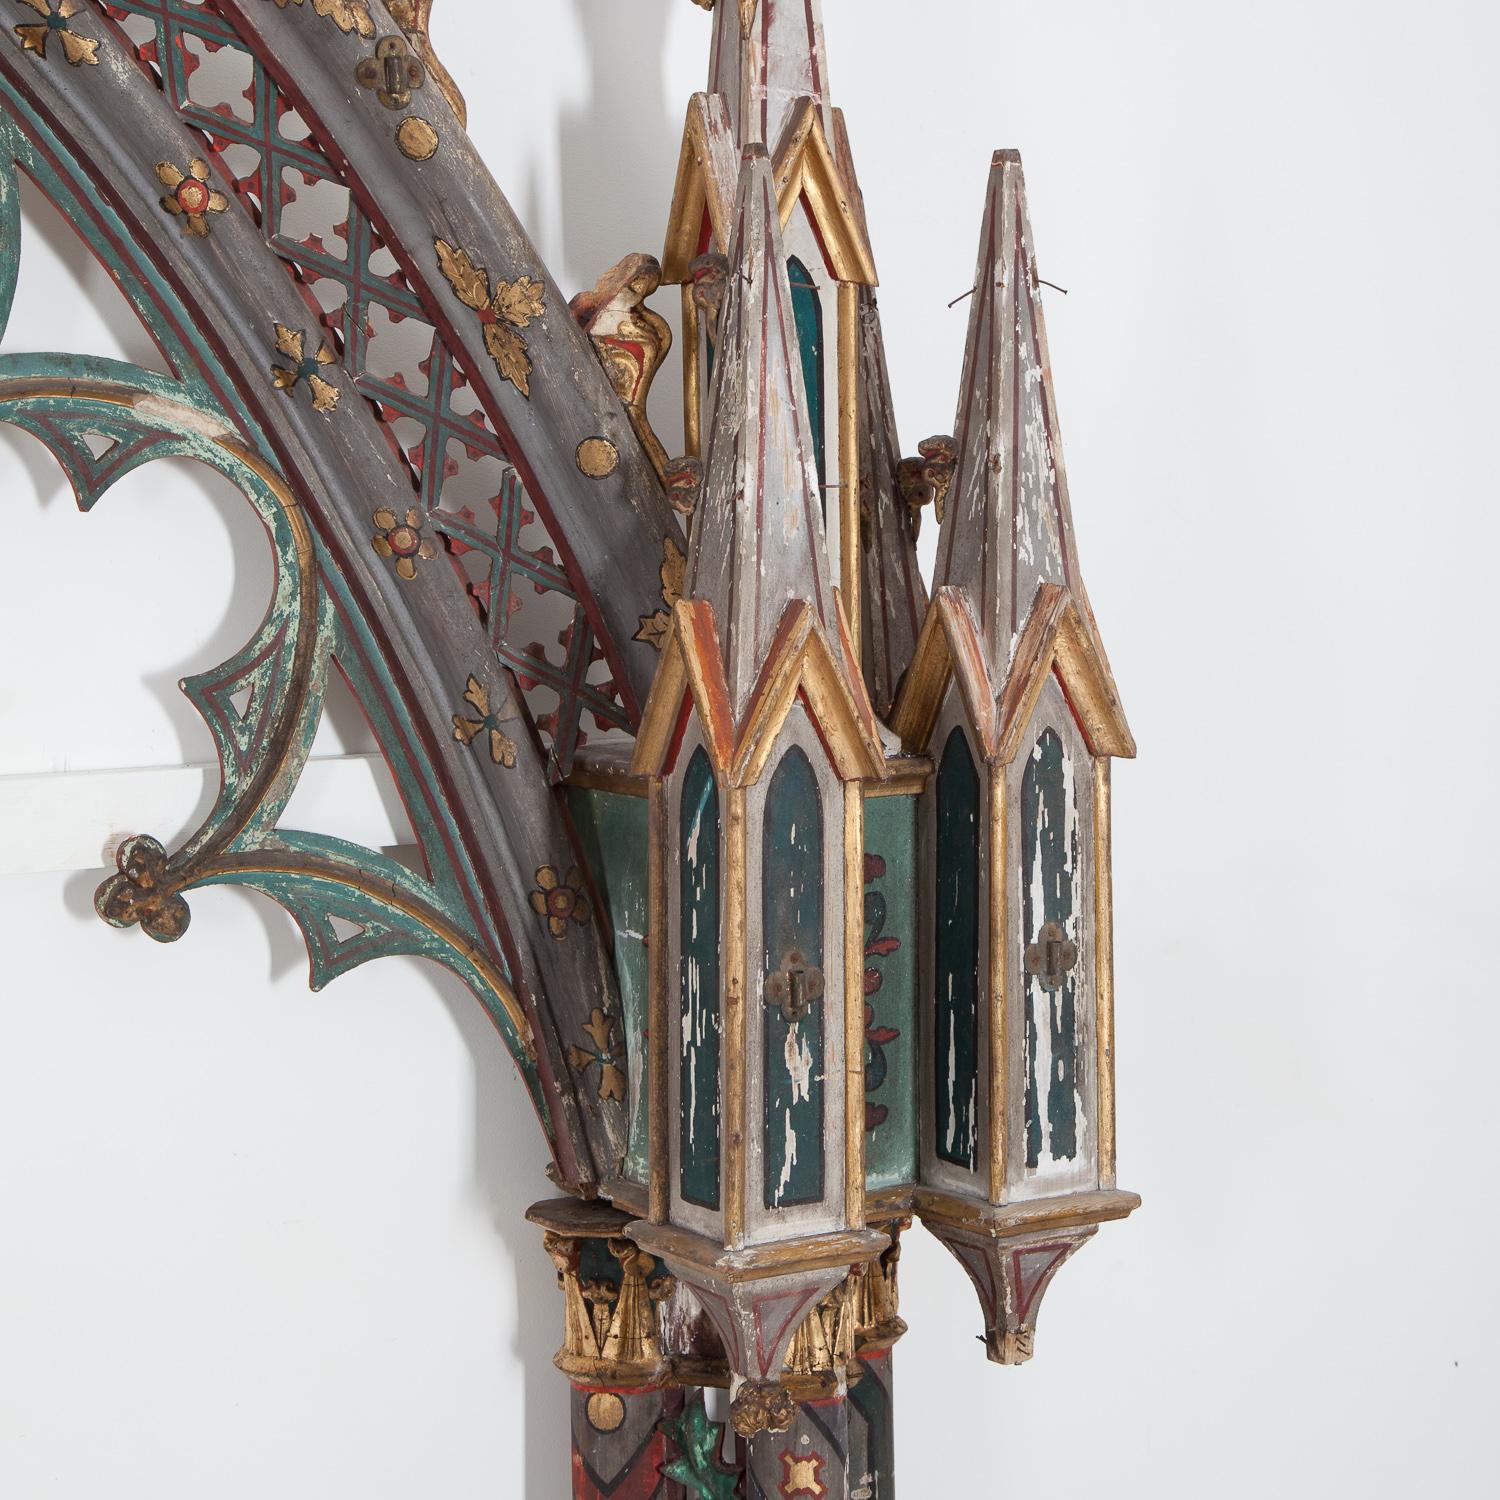 A near pair of spectacular 19th century ecclesiastical painted Gothic arched frames.

Each arch consists of three sections. Both are held together across the width by a new piece of painted wood.
They are lovely decorative pieces, which are in